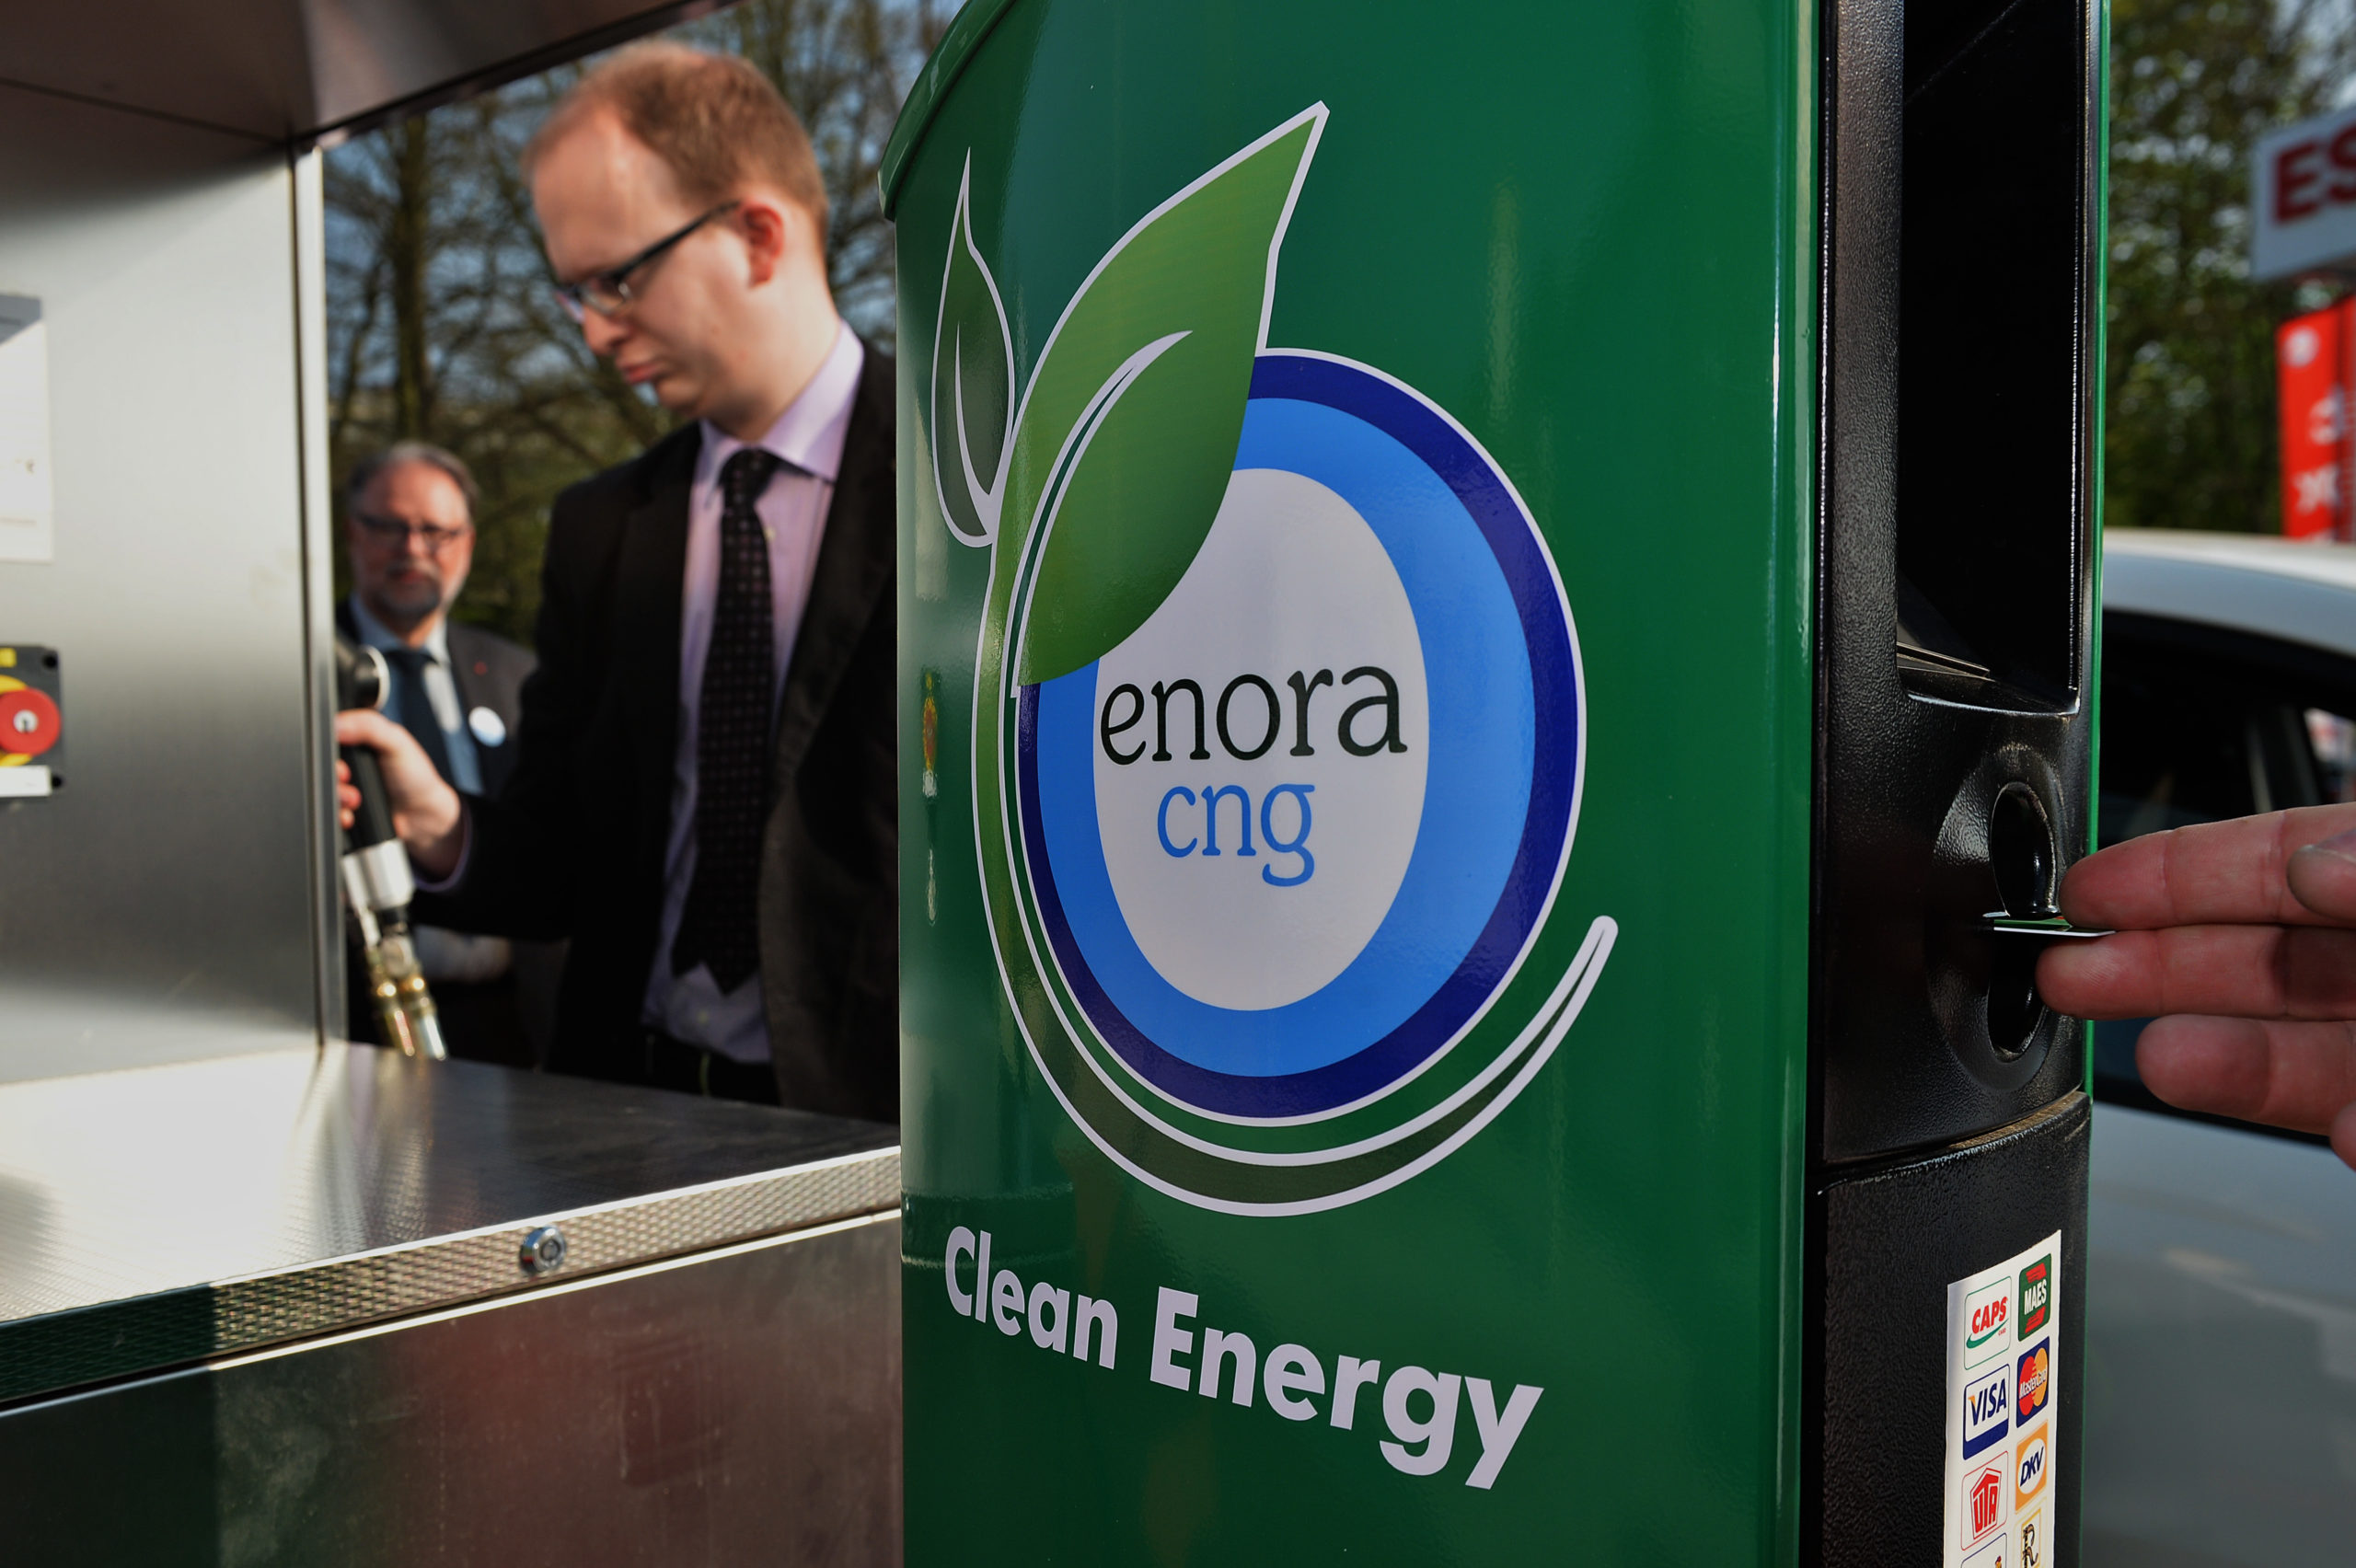 Enora inaugurates Belgium’s largest CNG gas station in Leuze